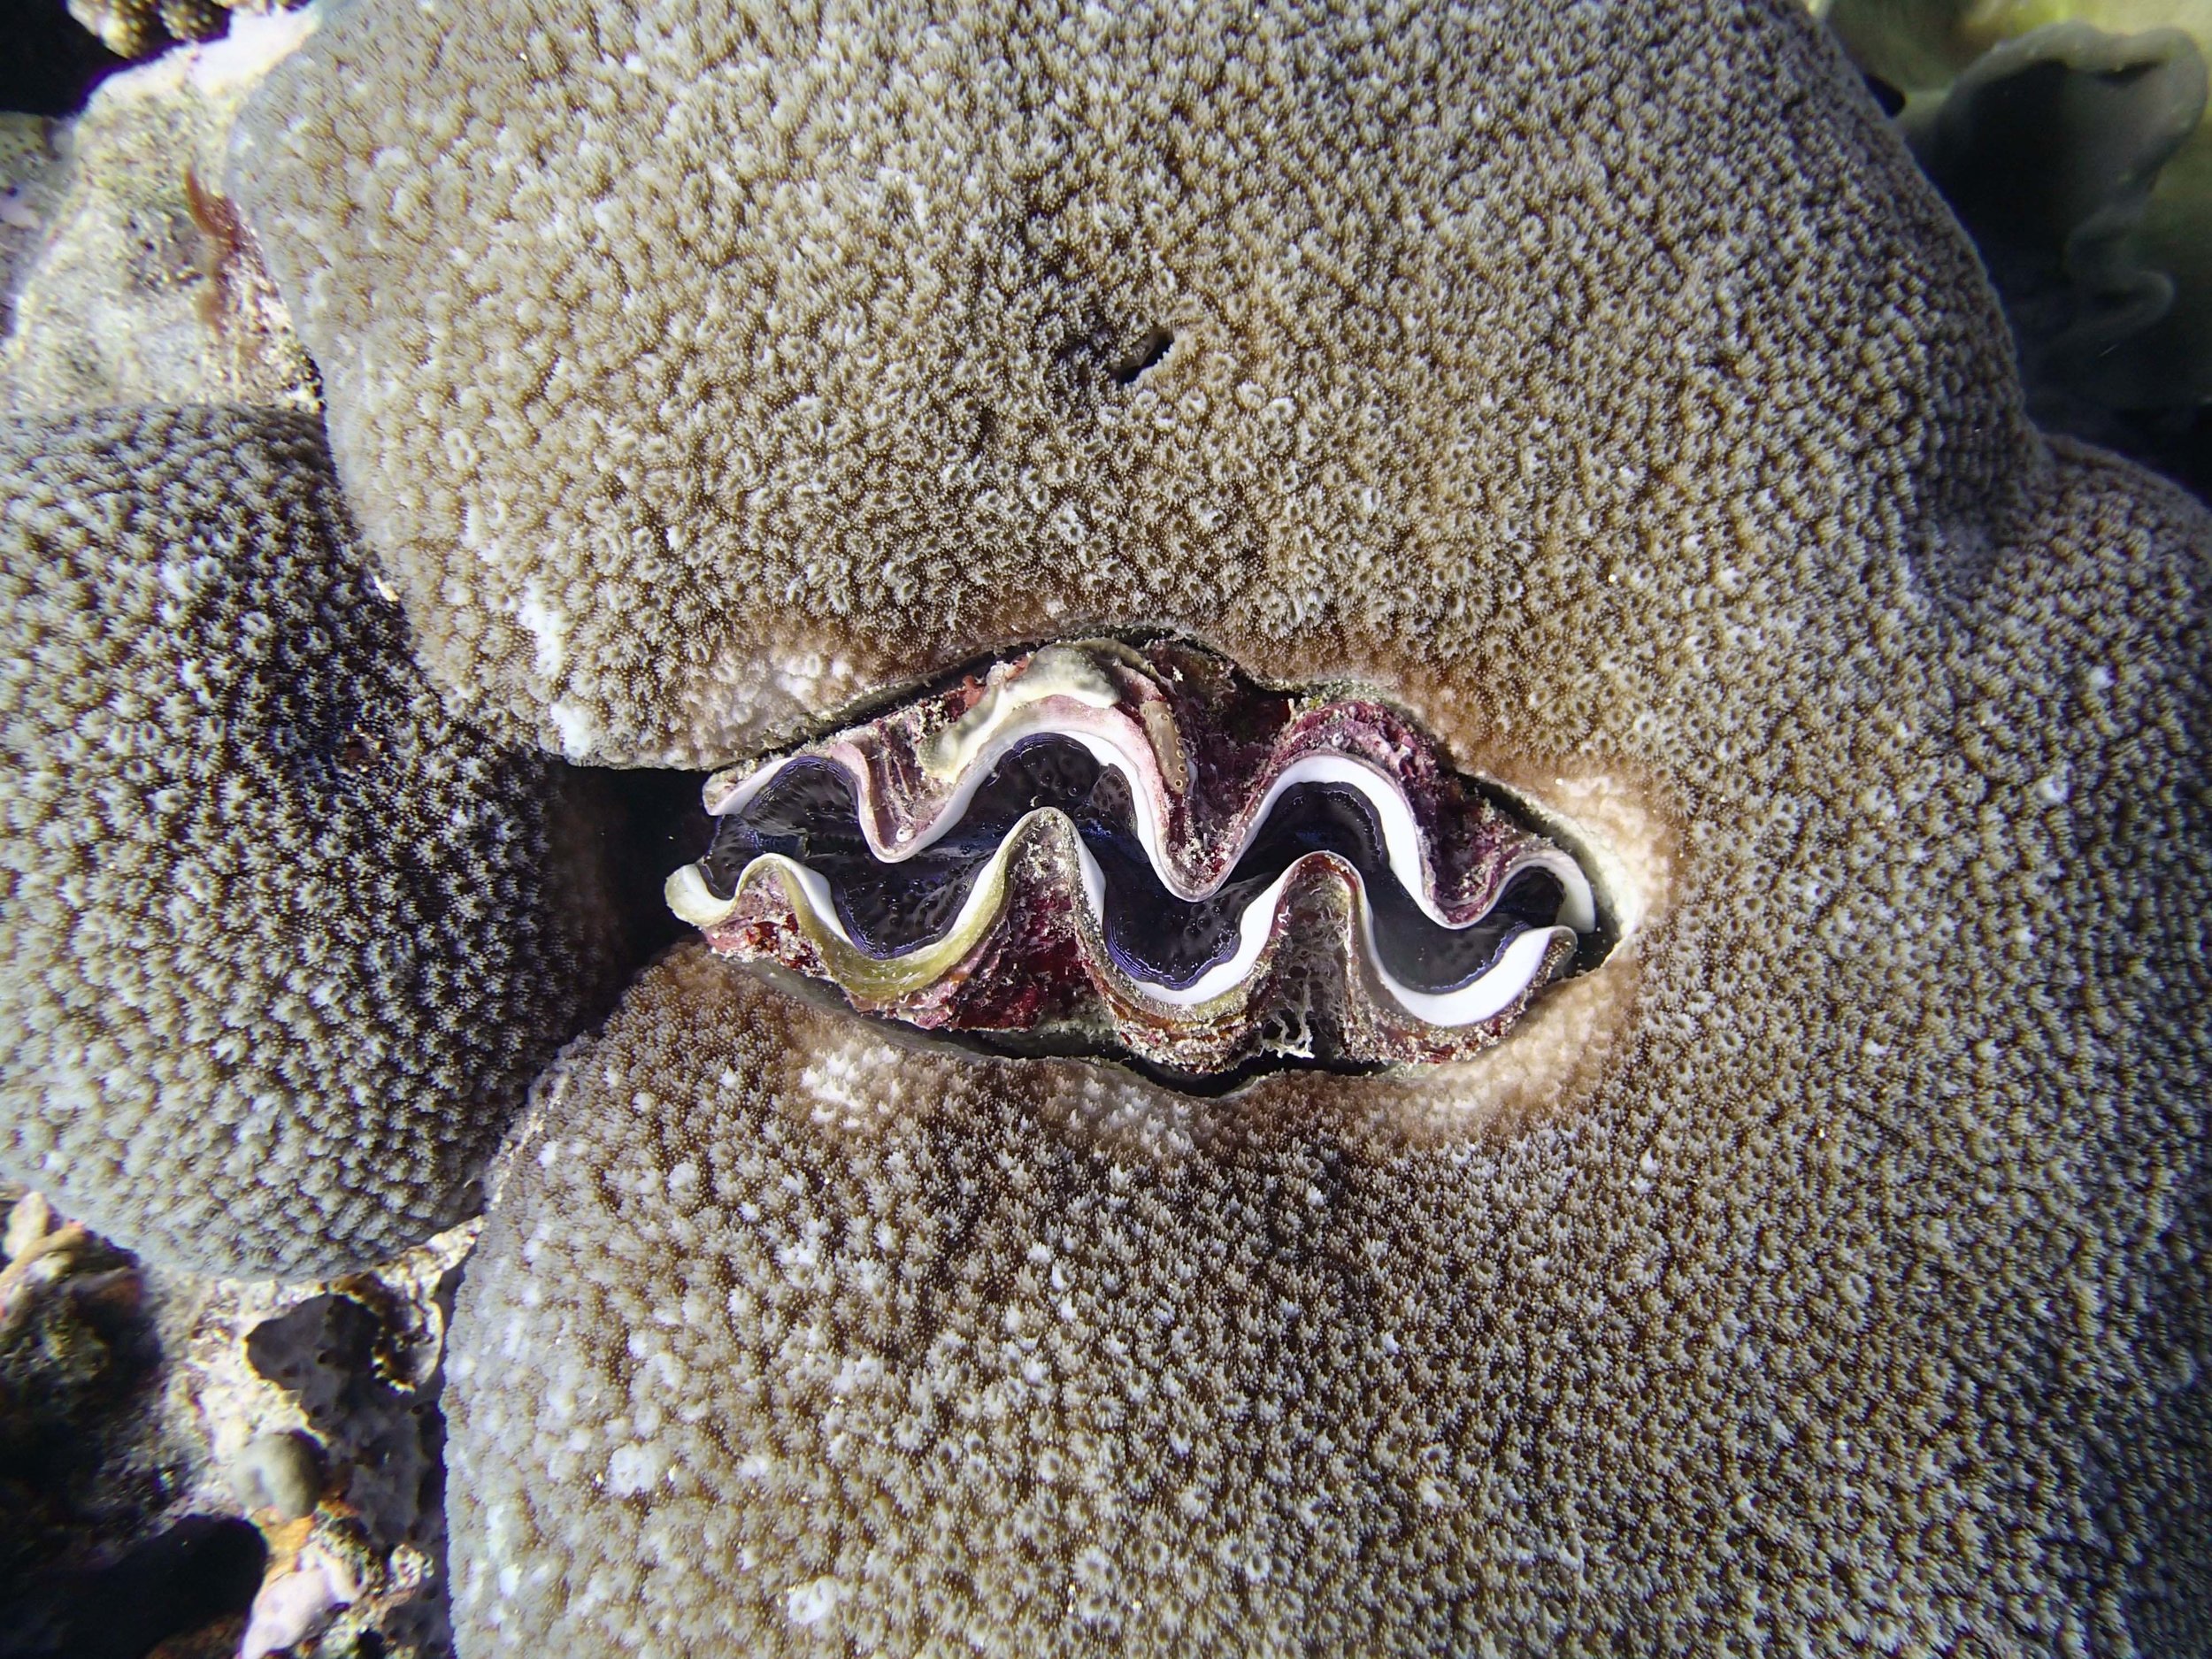 giant clam within coral.jpg